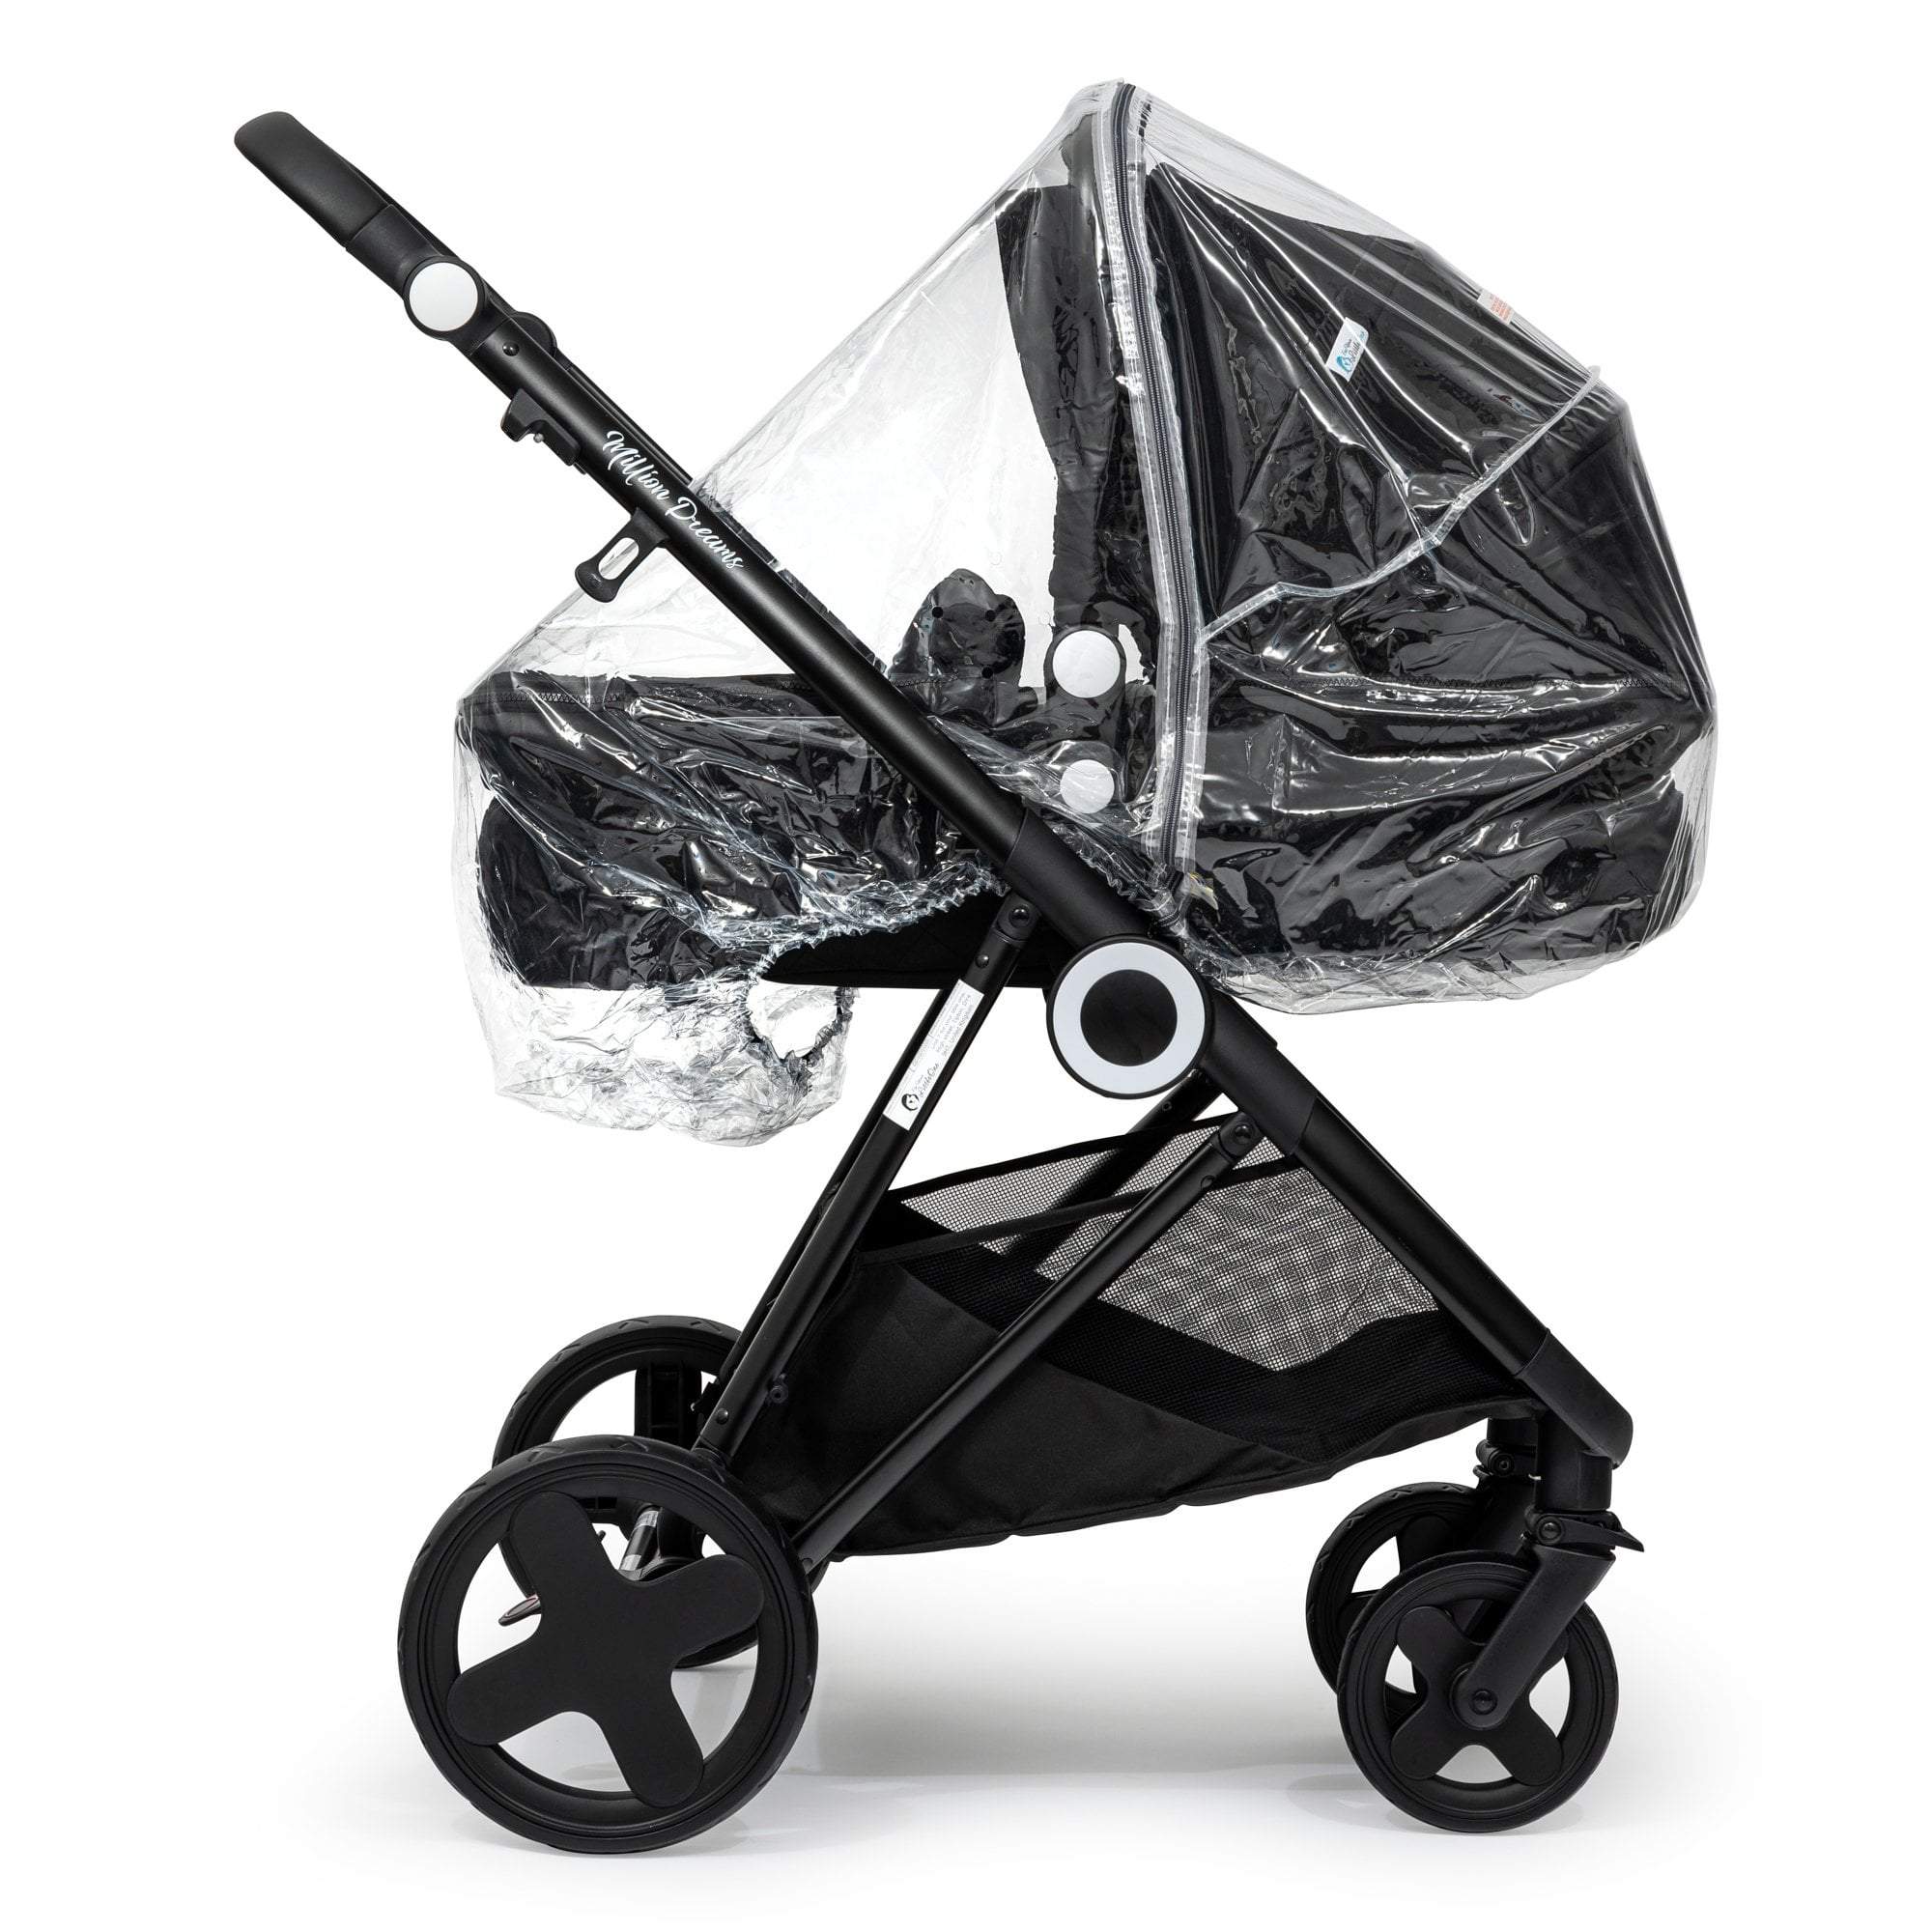 Carrycot Raincover Compatible With Norton - Fits All Models - For Your Little One